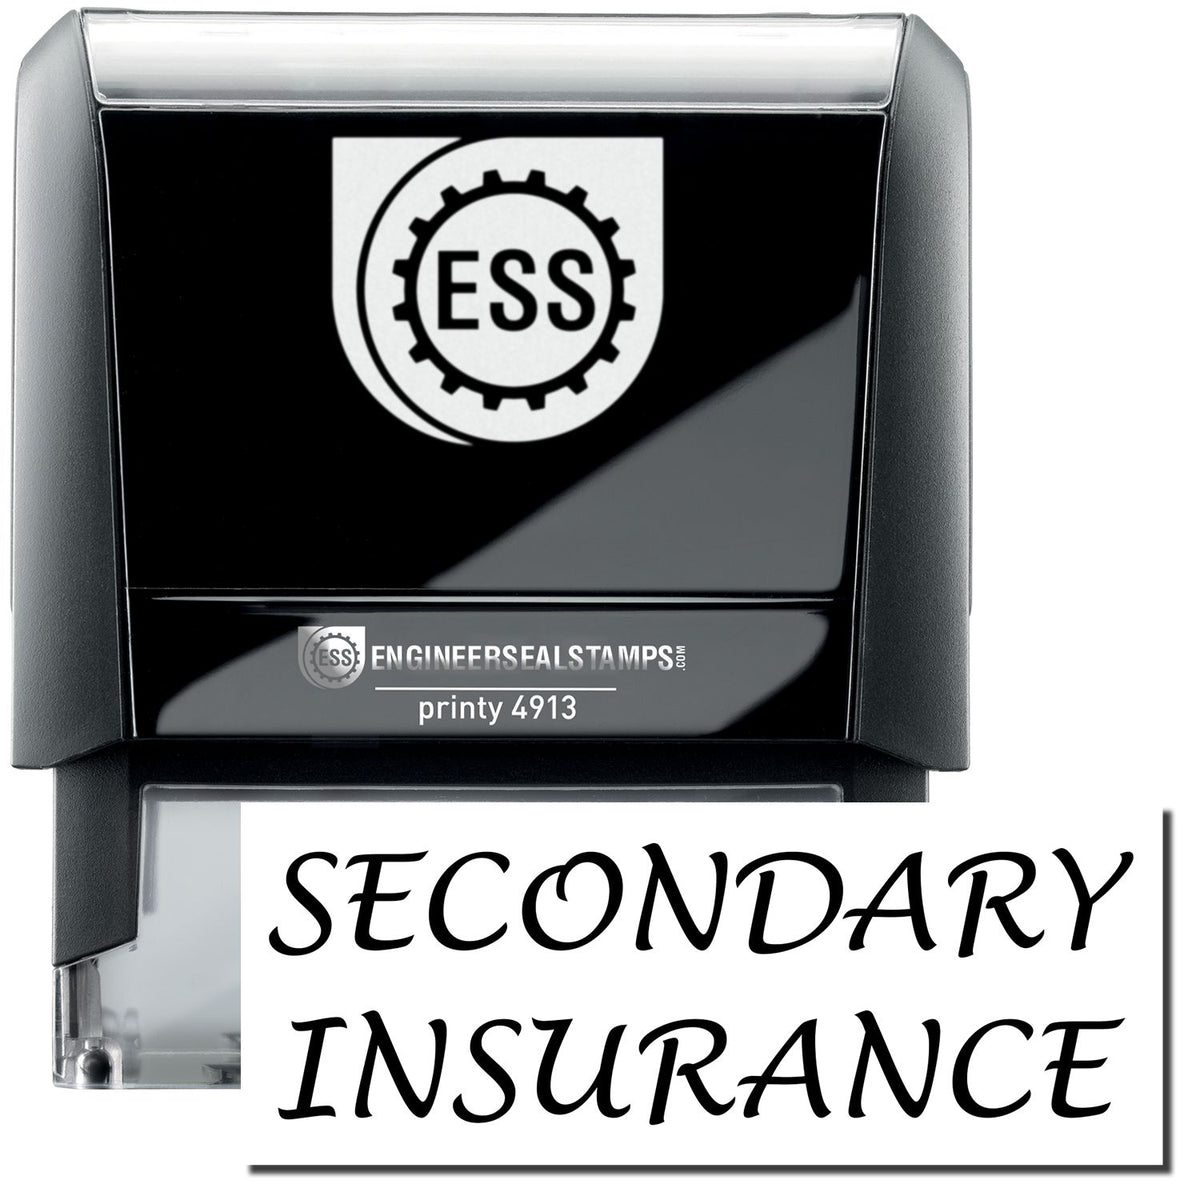 A self-inking stamp with a stamped image showing how the text &quot;SECONDARY INSURANCE&quot; in a large font is displayed by it.